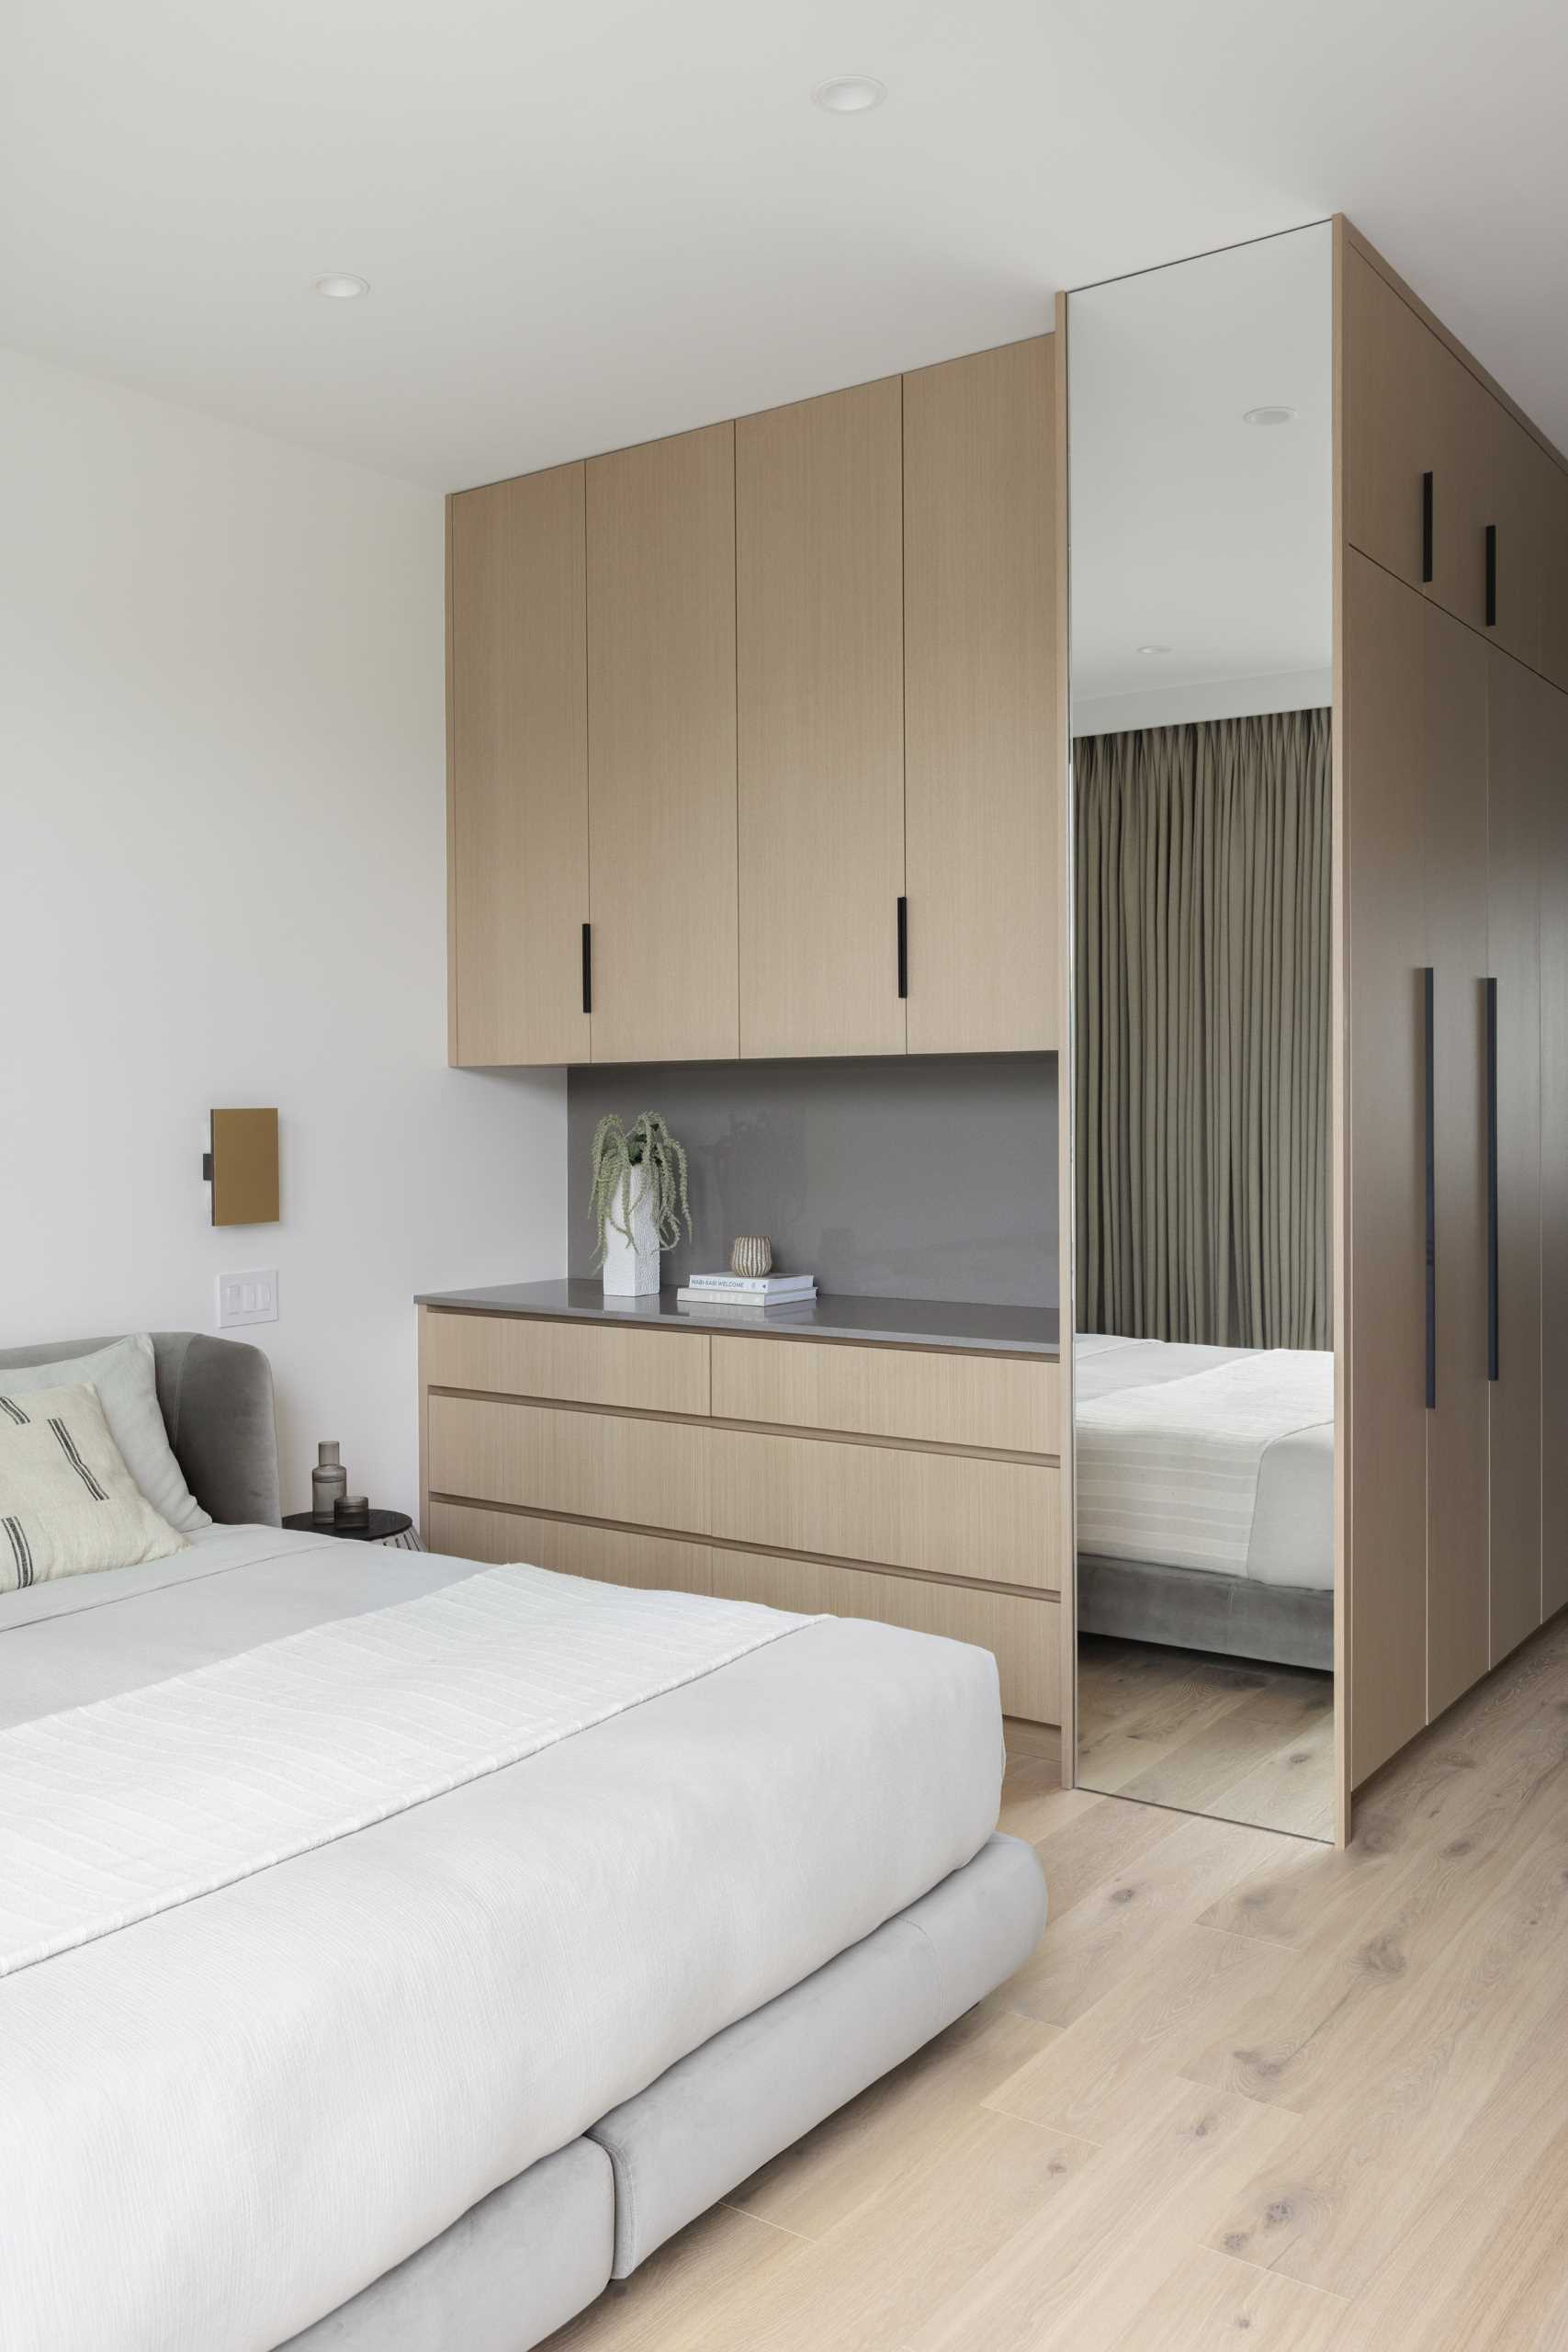 A modern bedroom with custom joinery.